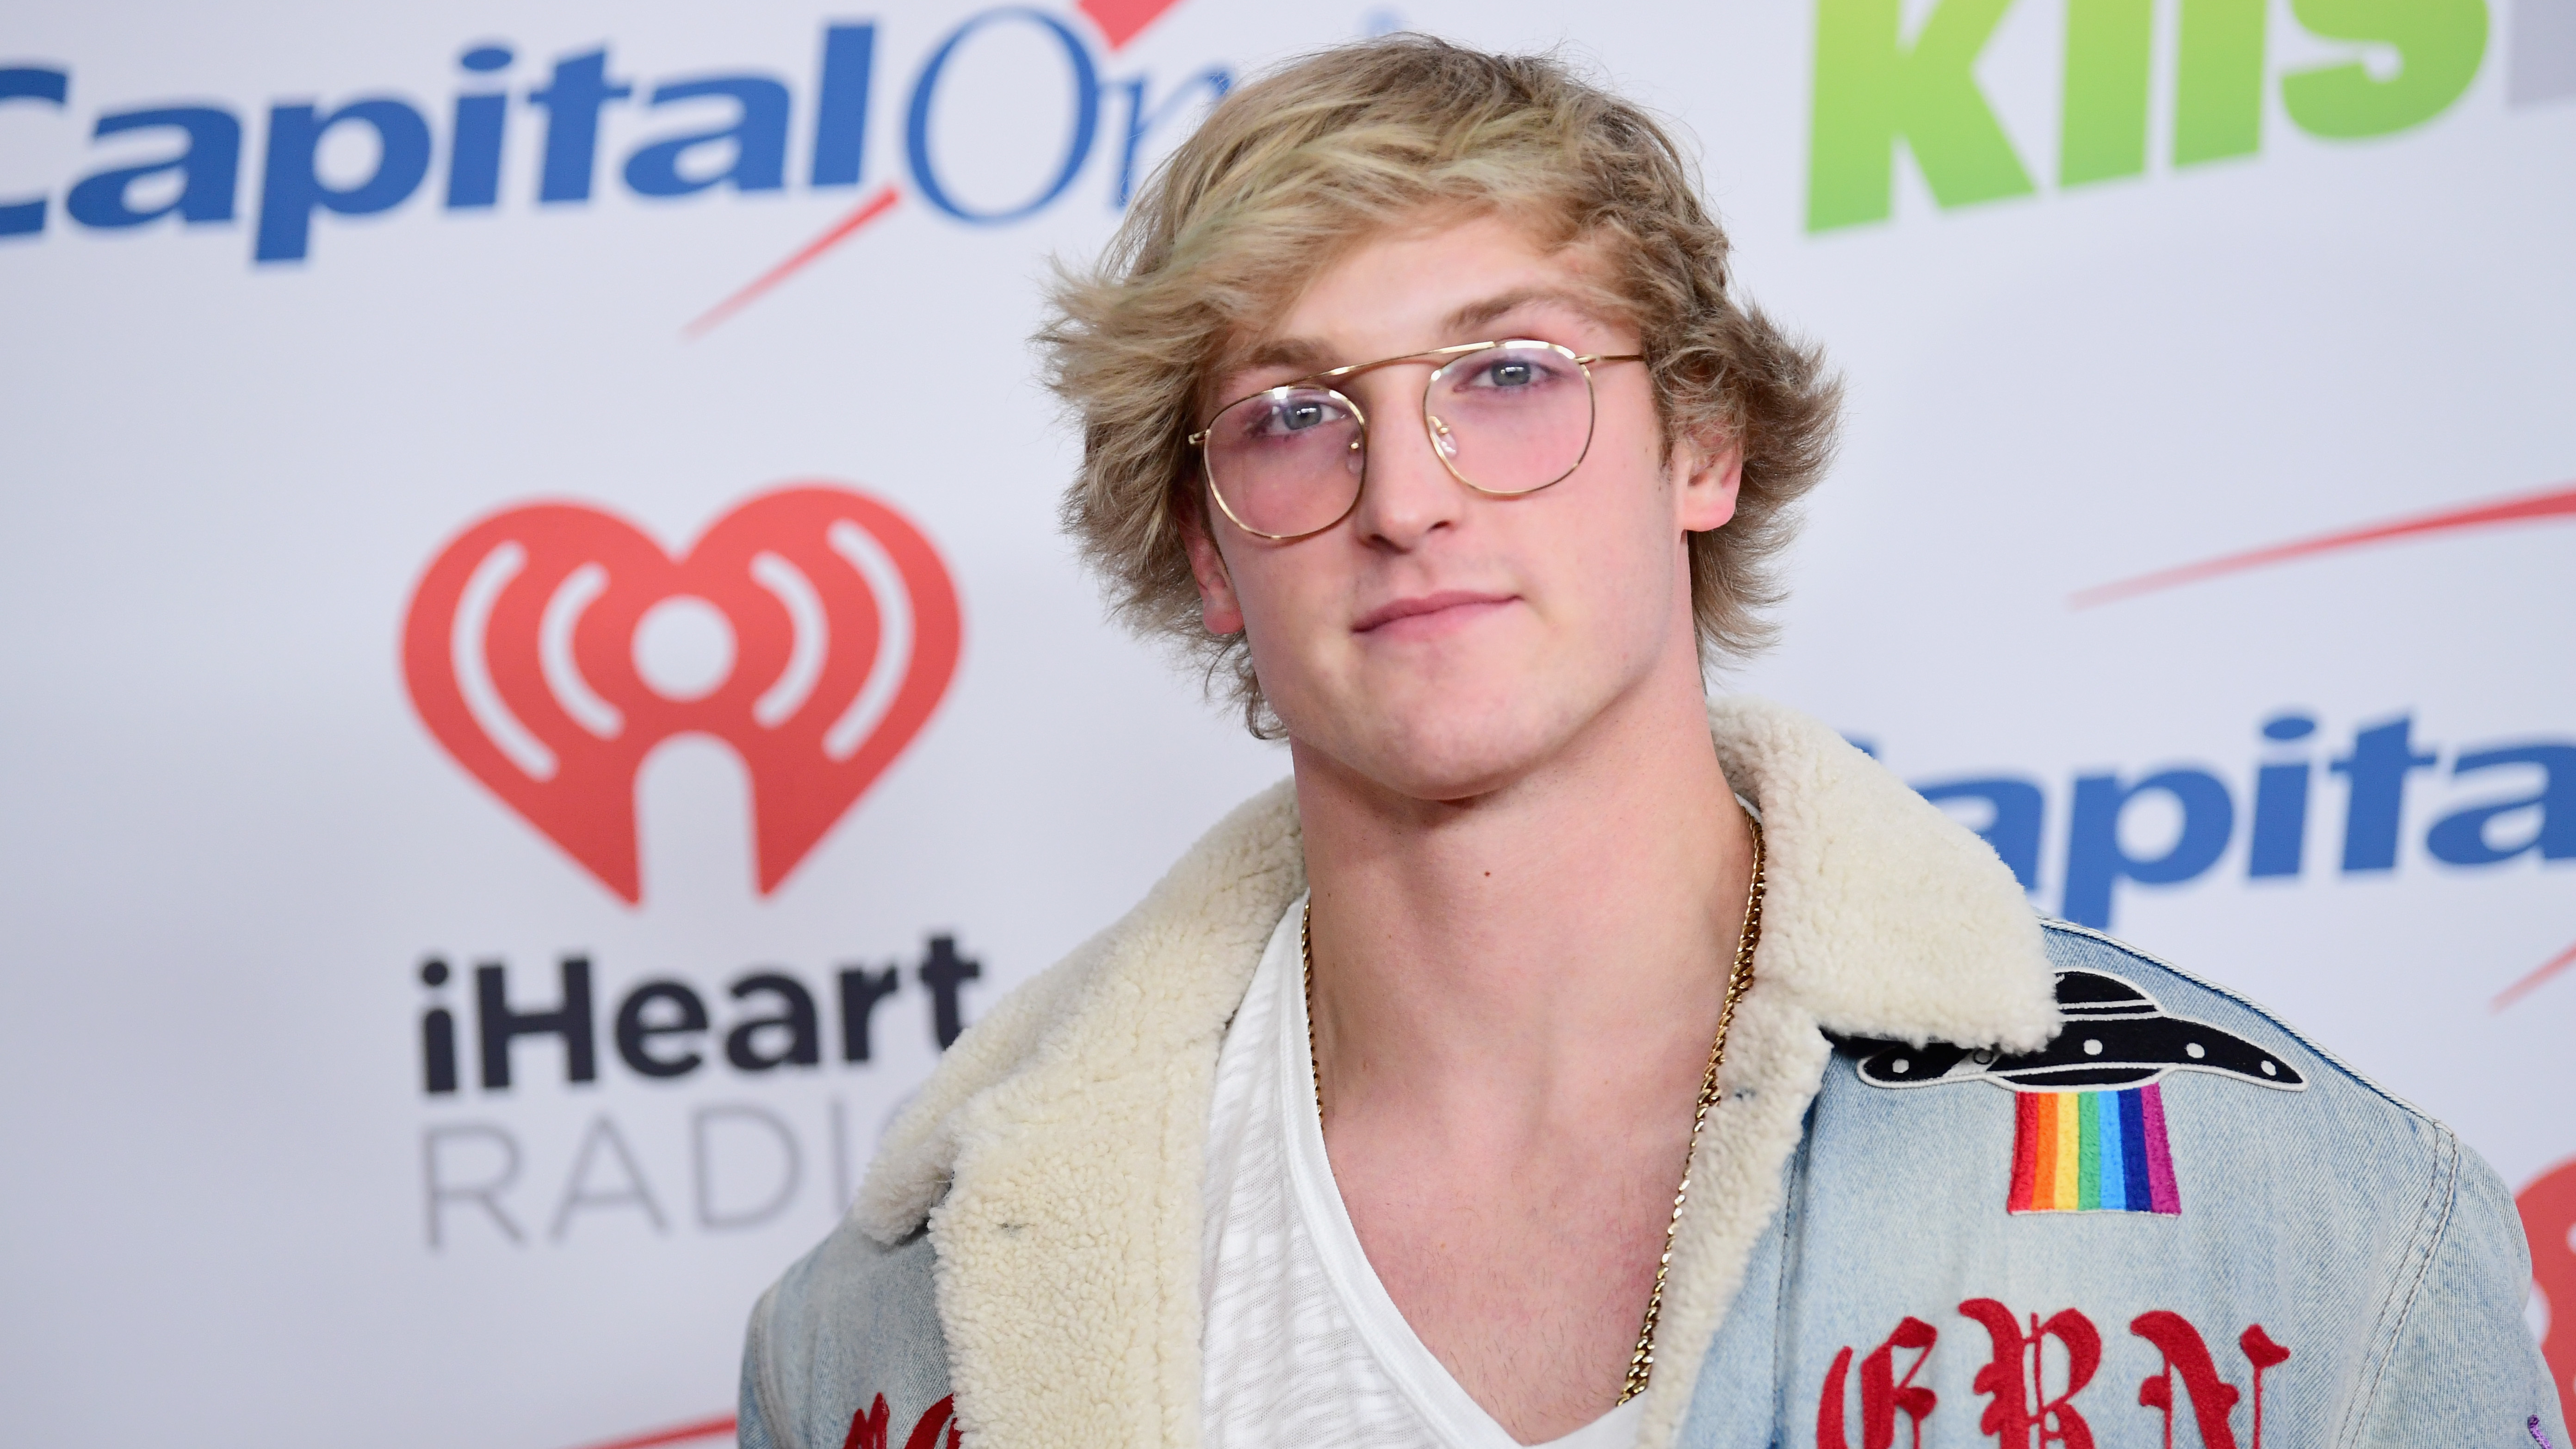 Logan Paul came under heavy criticism for a video he posted on YouTube depicting a dead body, apparently the result of suicide.